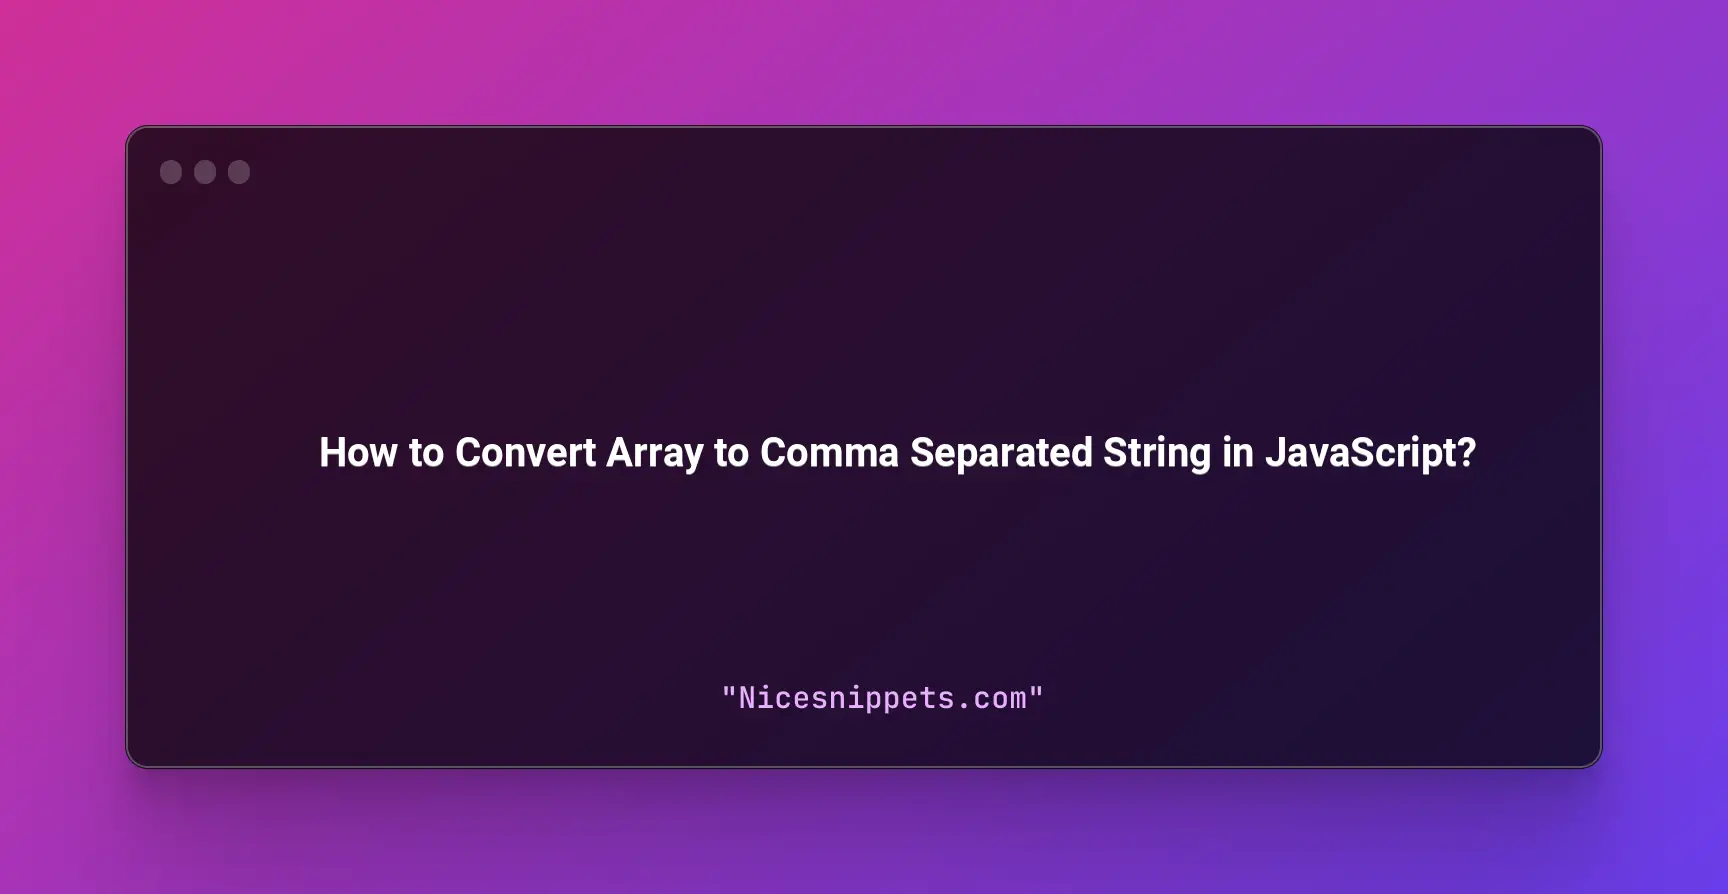 How to Convert Array to Comma Separated String in JavaScript?